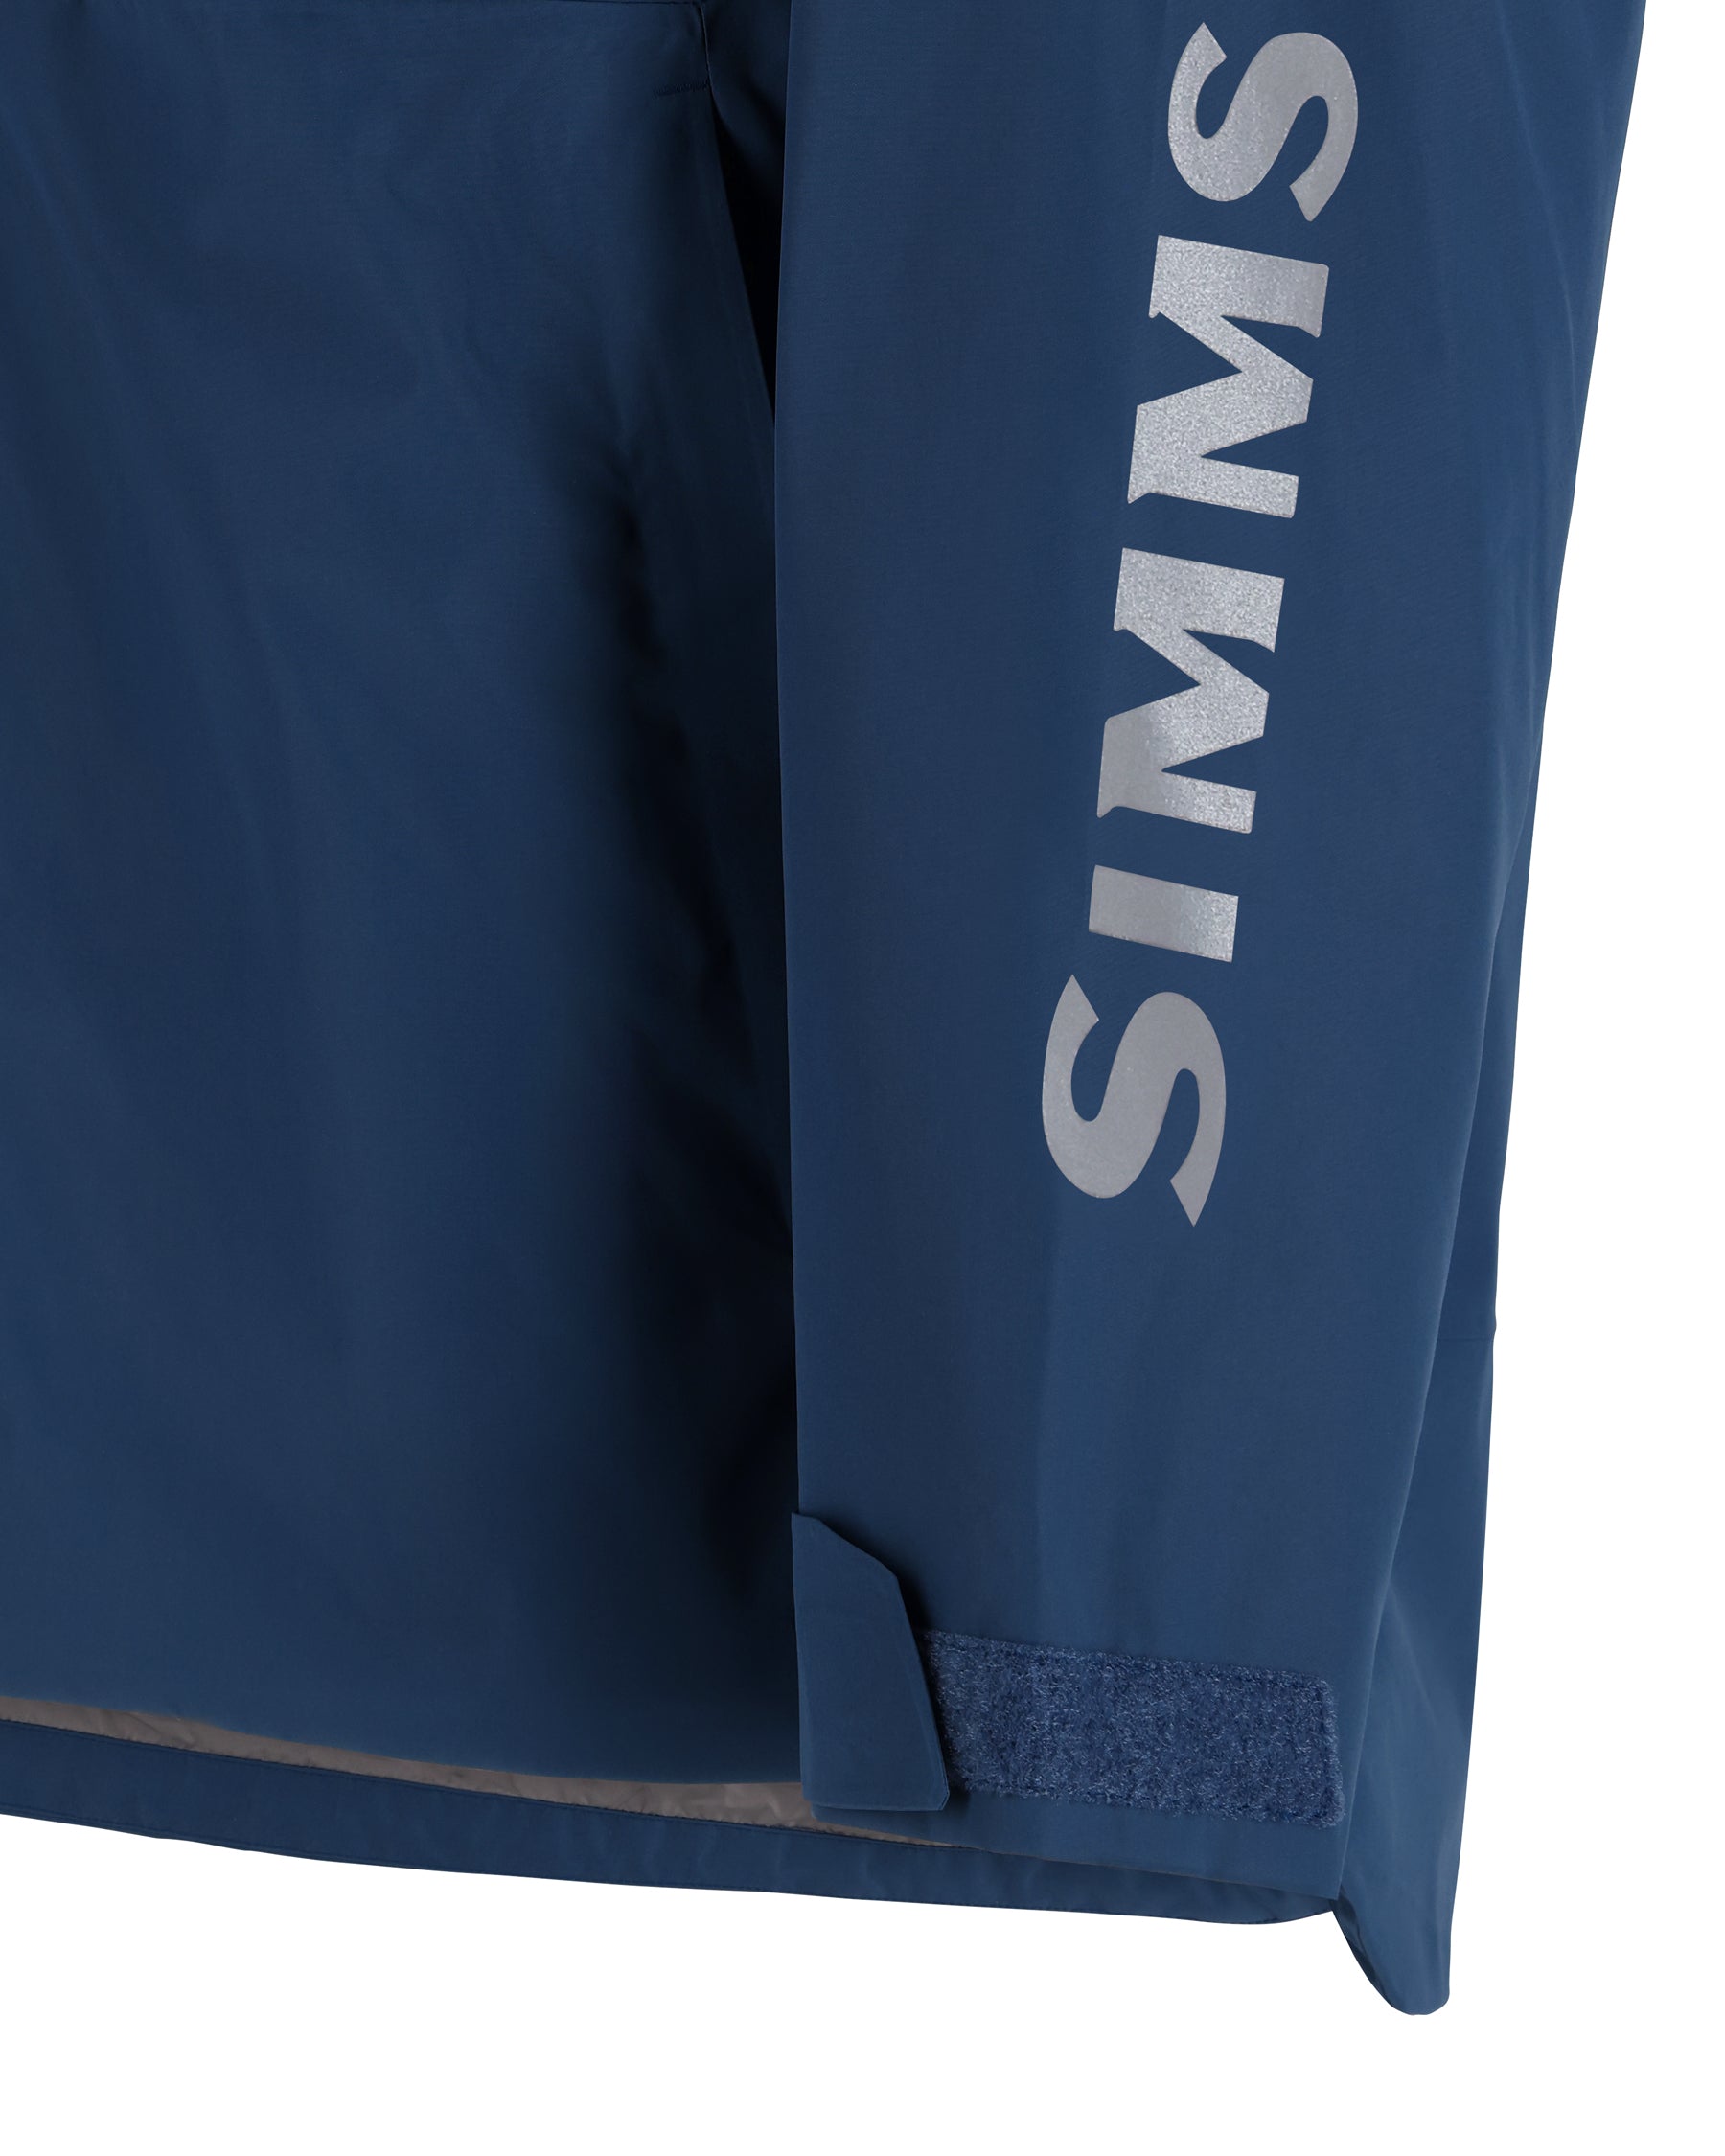 SIMMS M's Simms Challenger Fishing Jacket